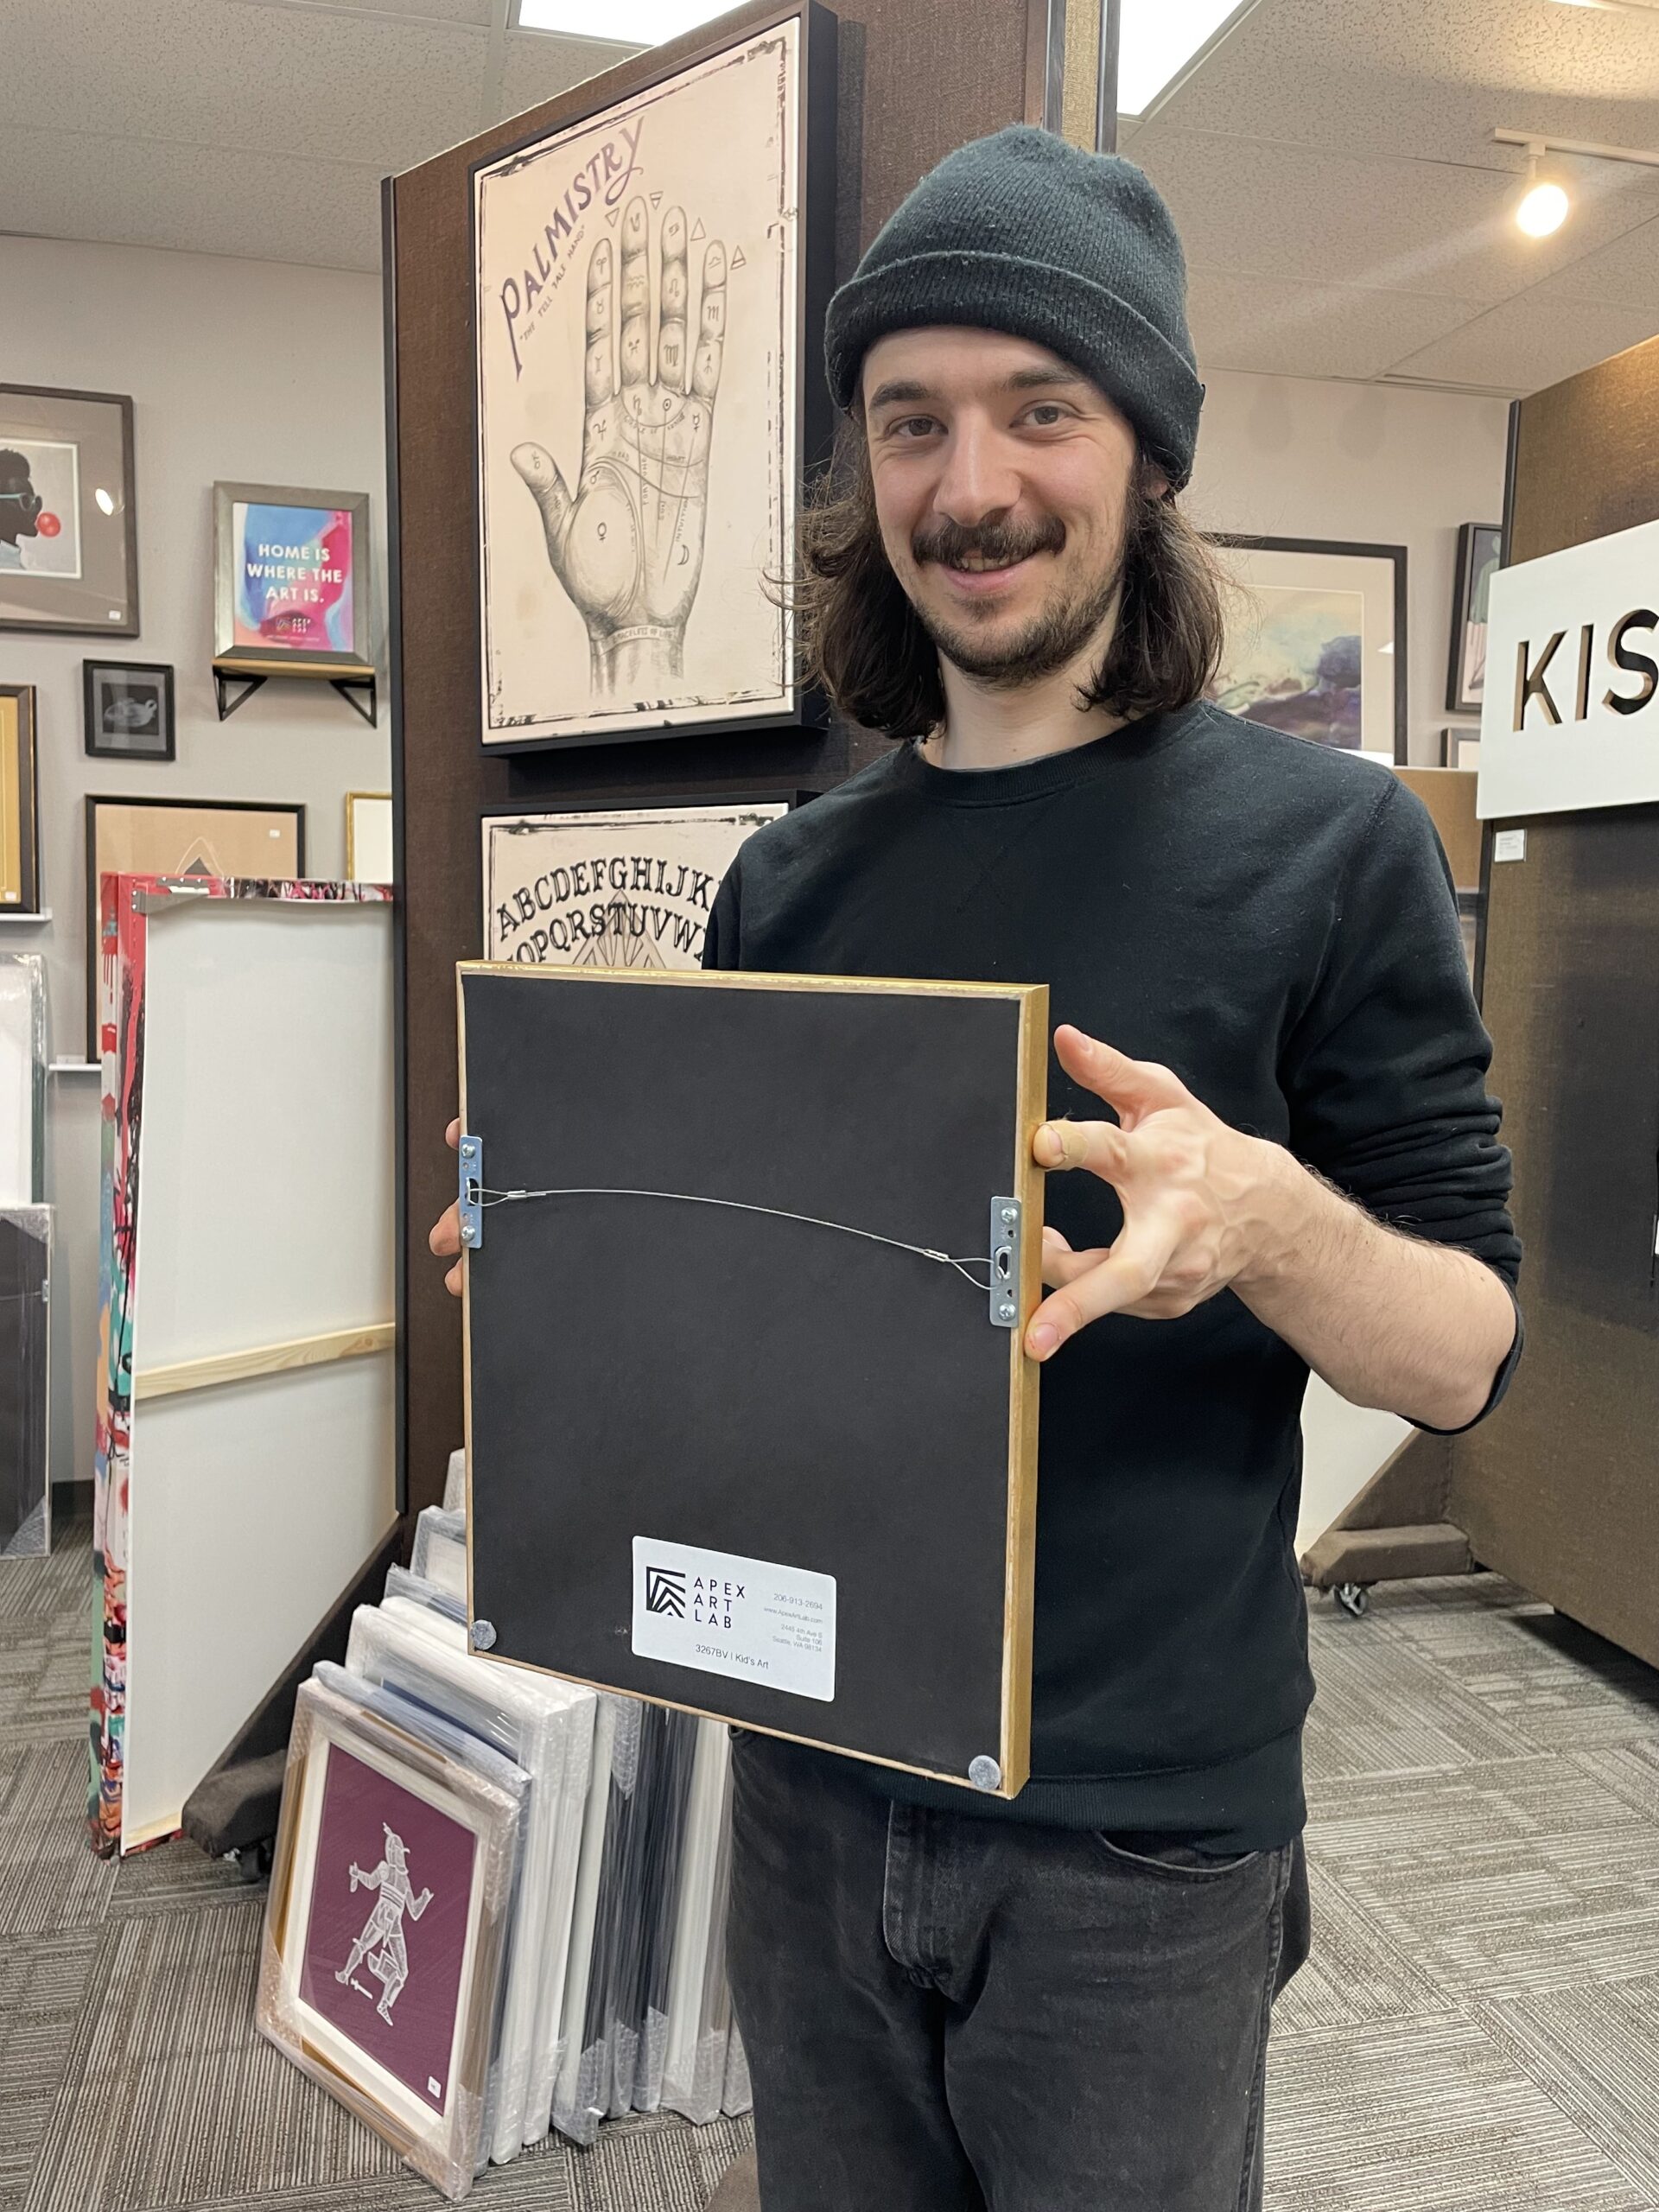 Staff member proudly holding up a completed framing project. Demonstrating the proper backing with paper, wire and bumpers